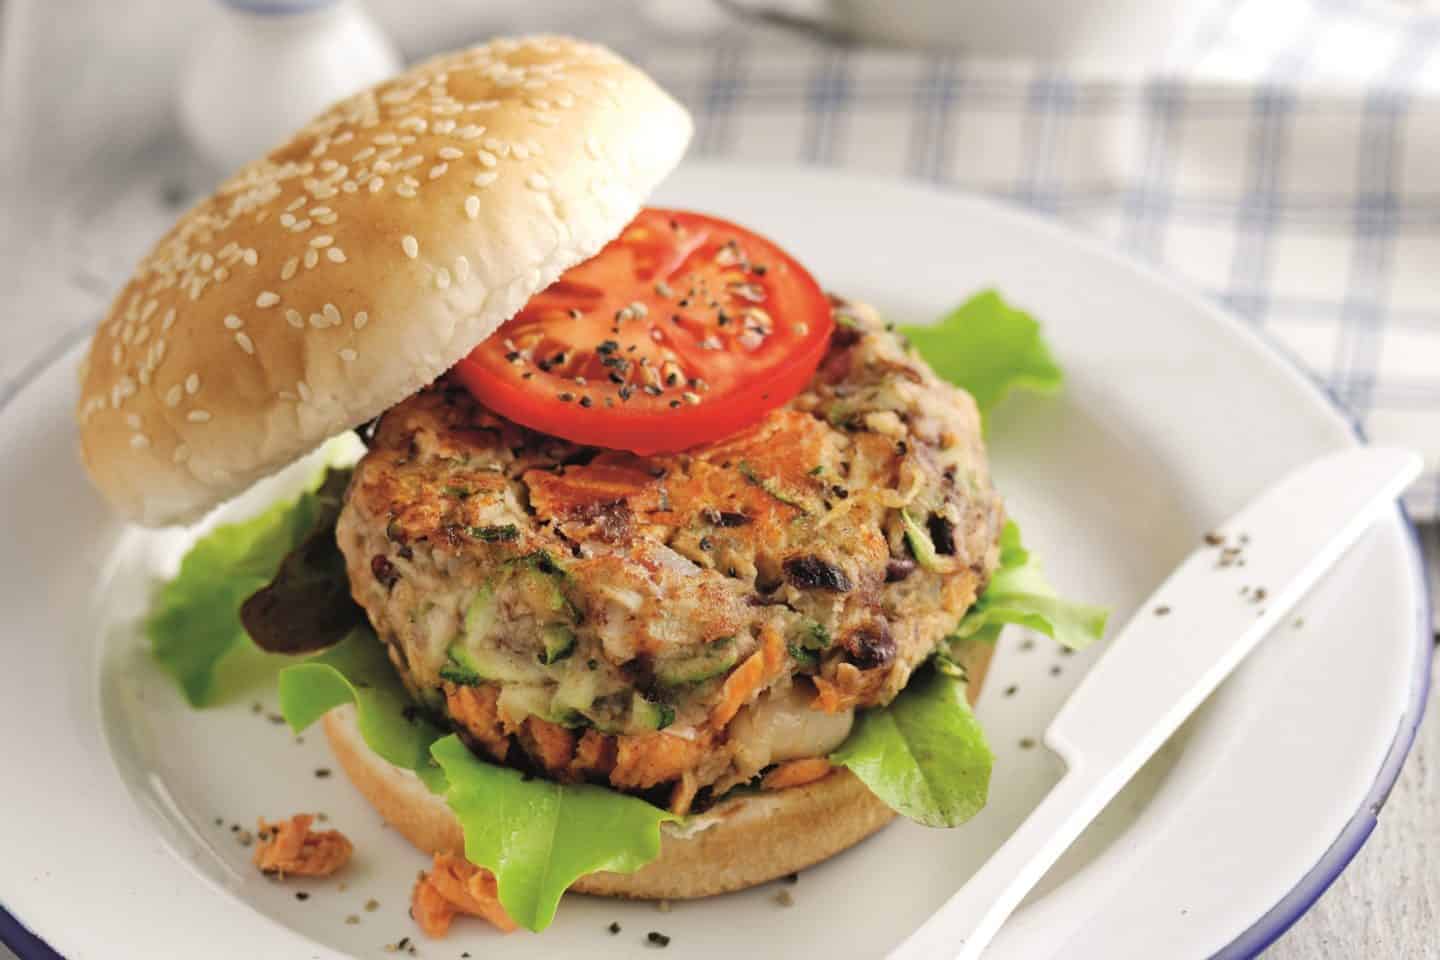 A sandwich on a plate, with Salmon and Salmon burger